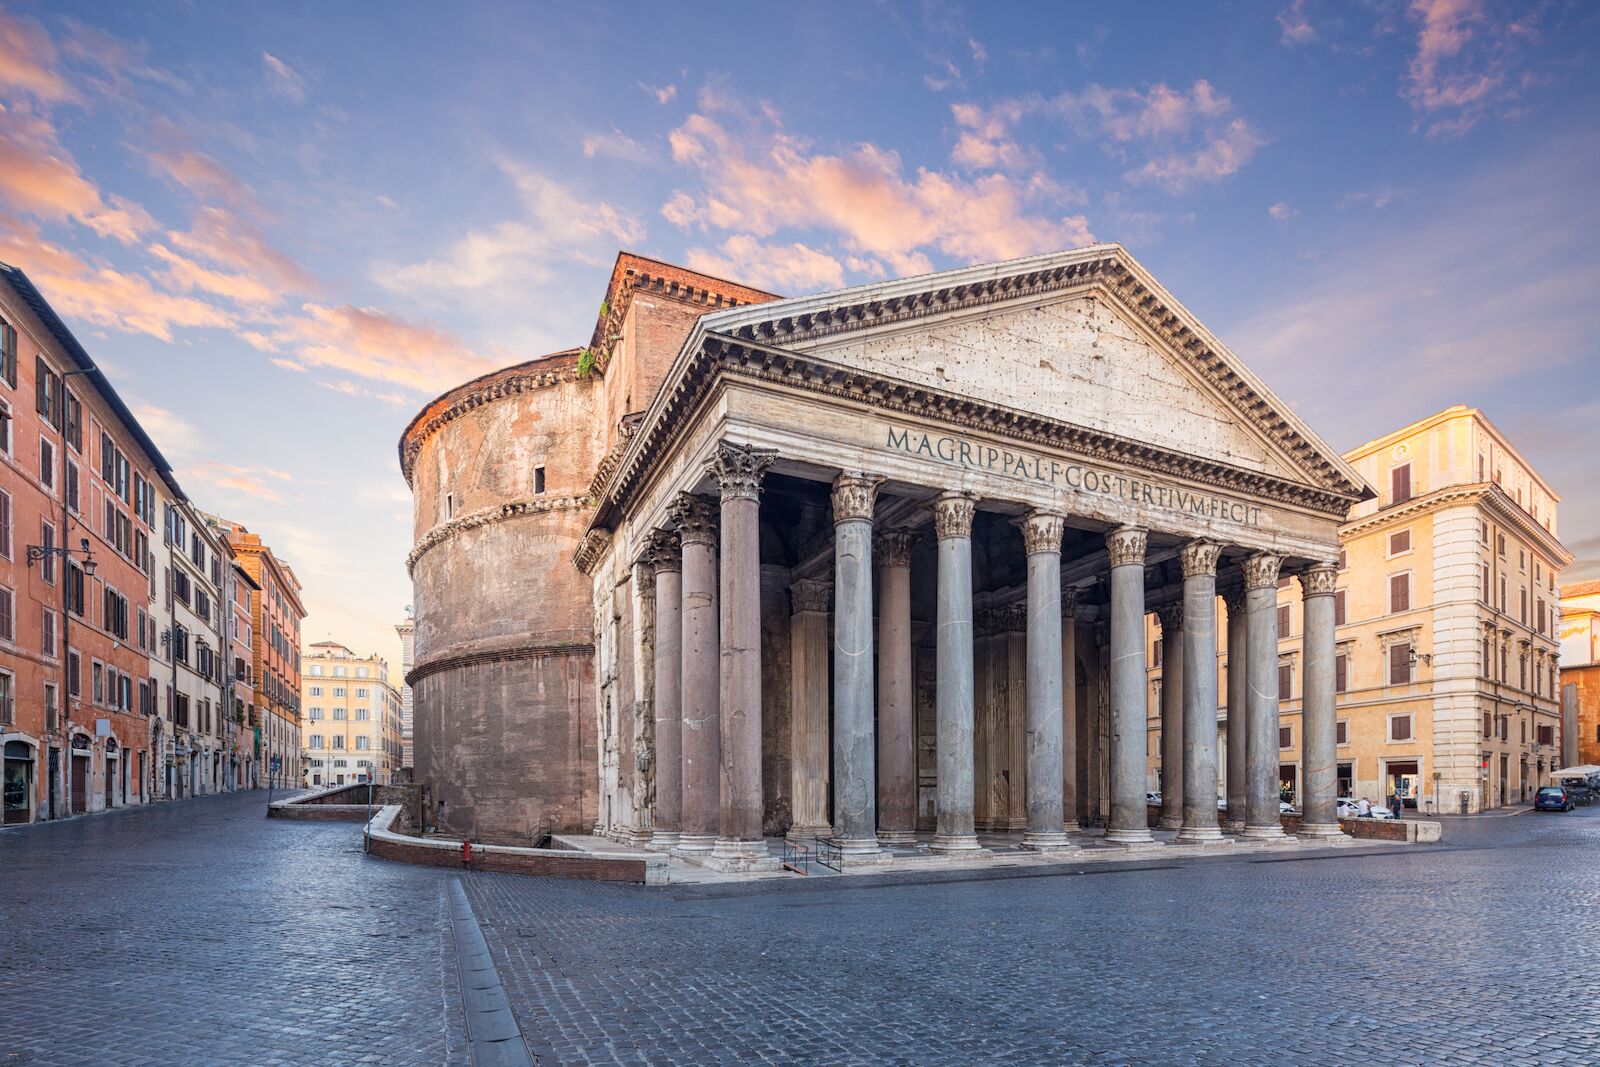 Street view of the Pantheon in Rome